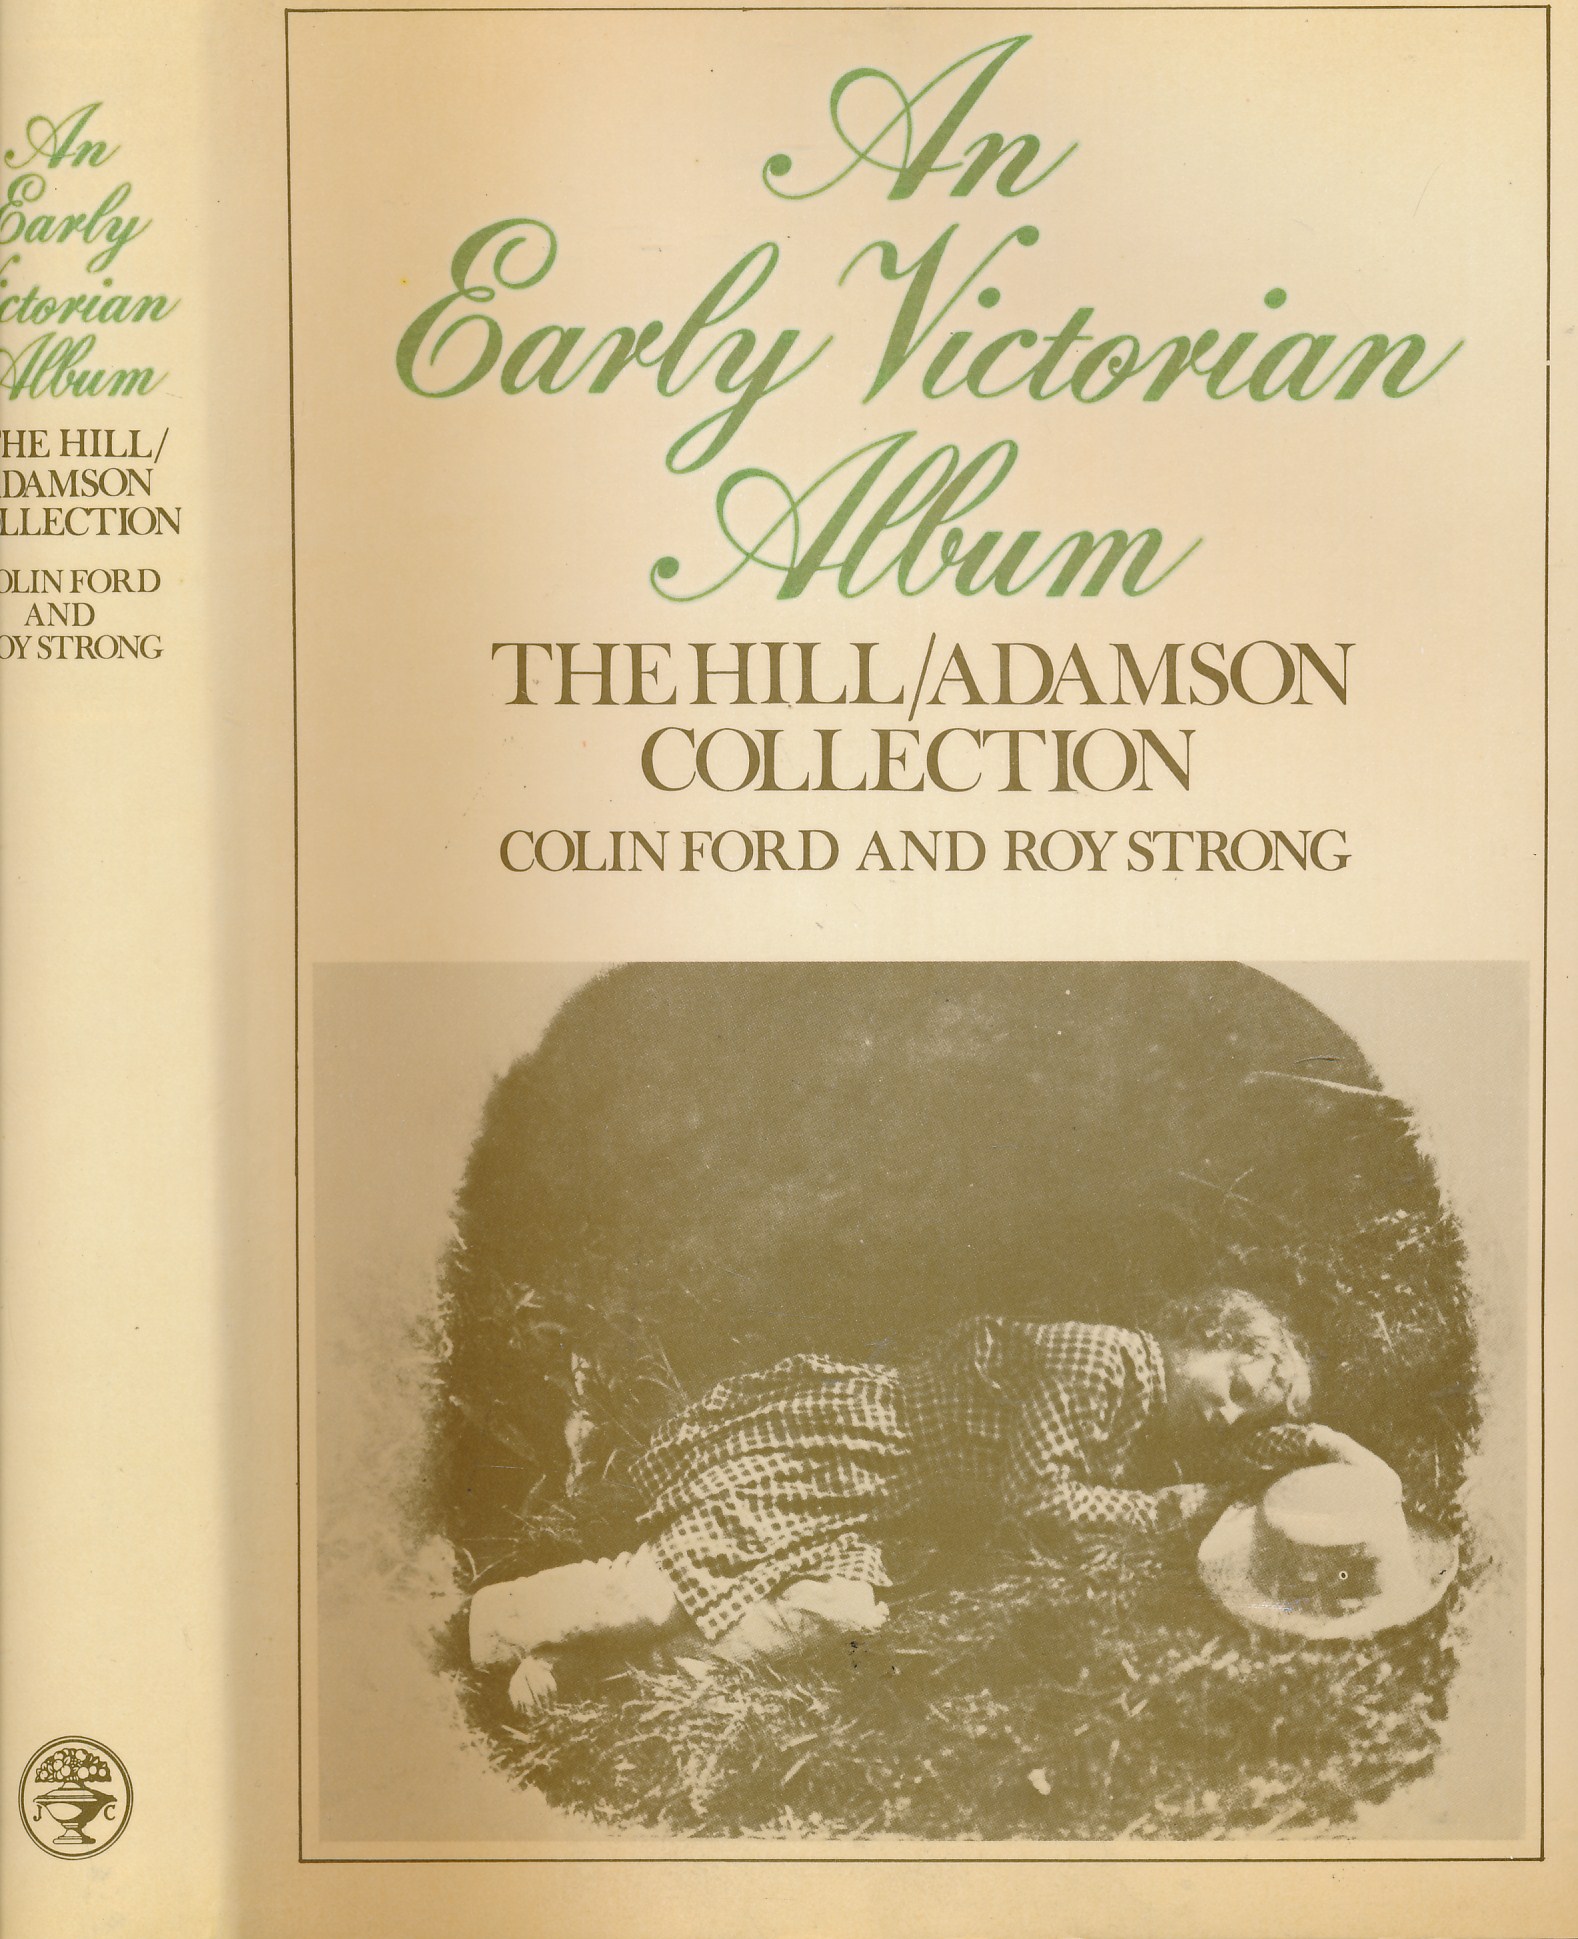 An Early Victorian Album. The Hill/Adamson Collection